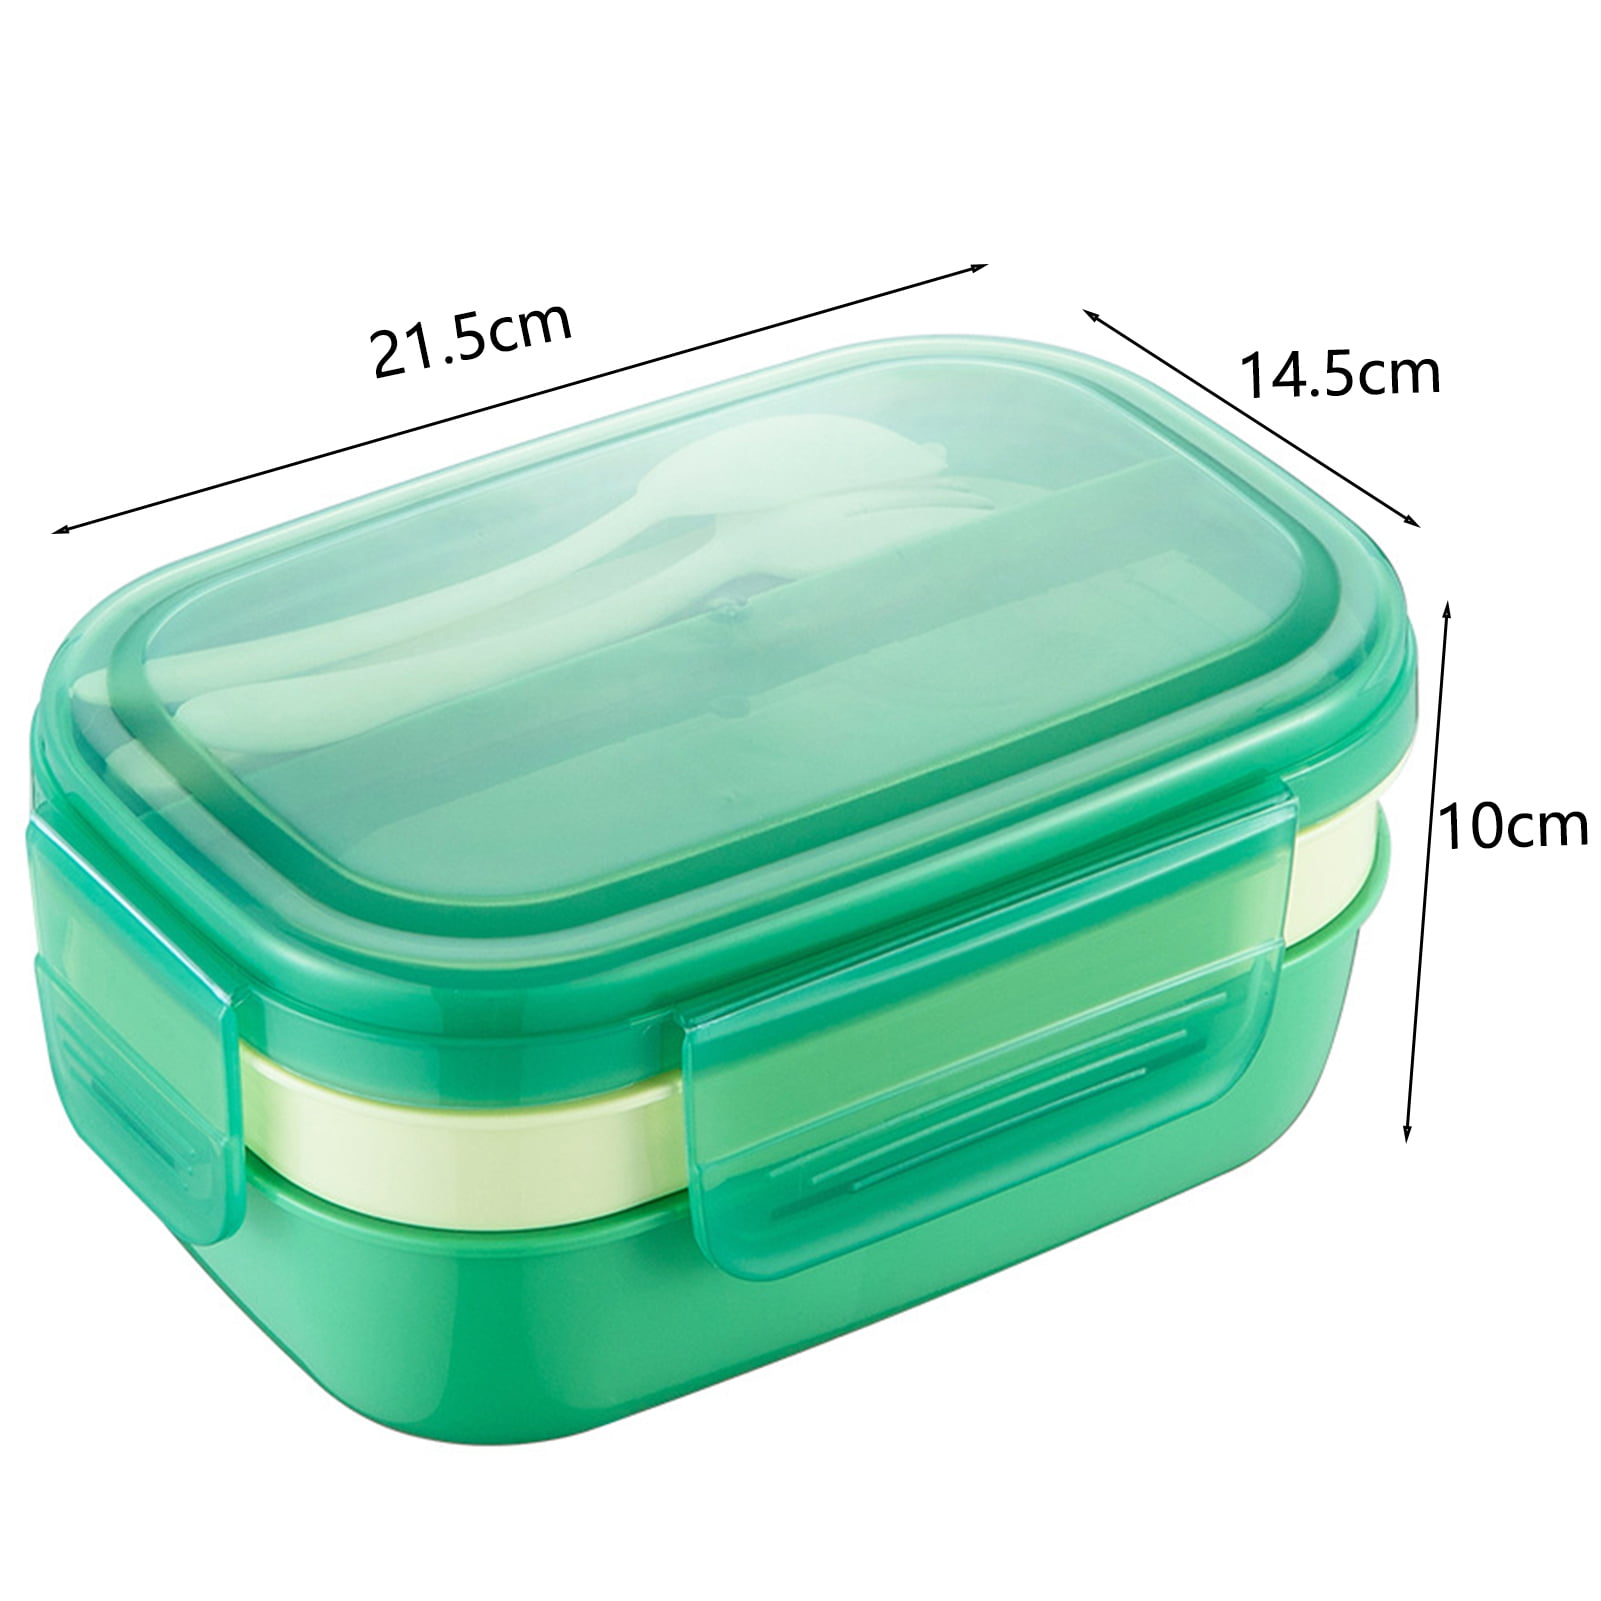 UDIYO Lunch Container Good Sealing Compartment Large Capacity with